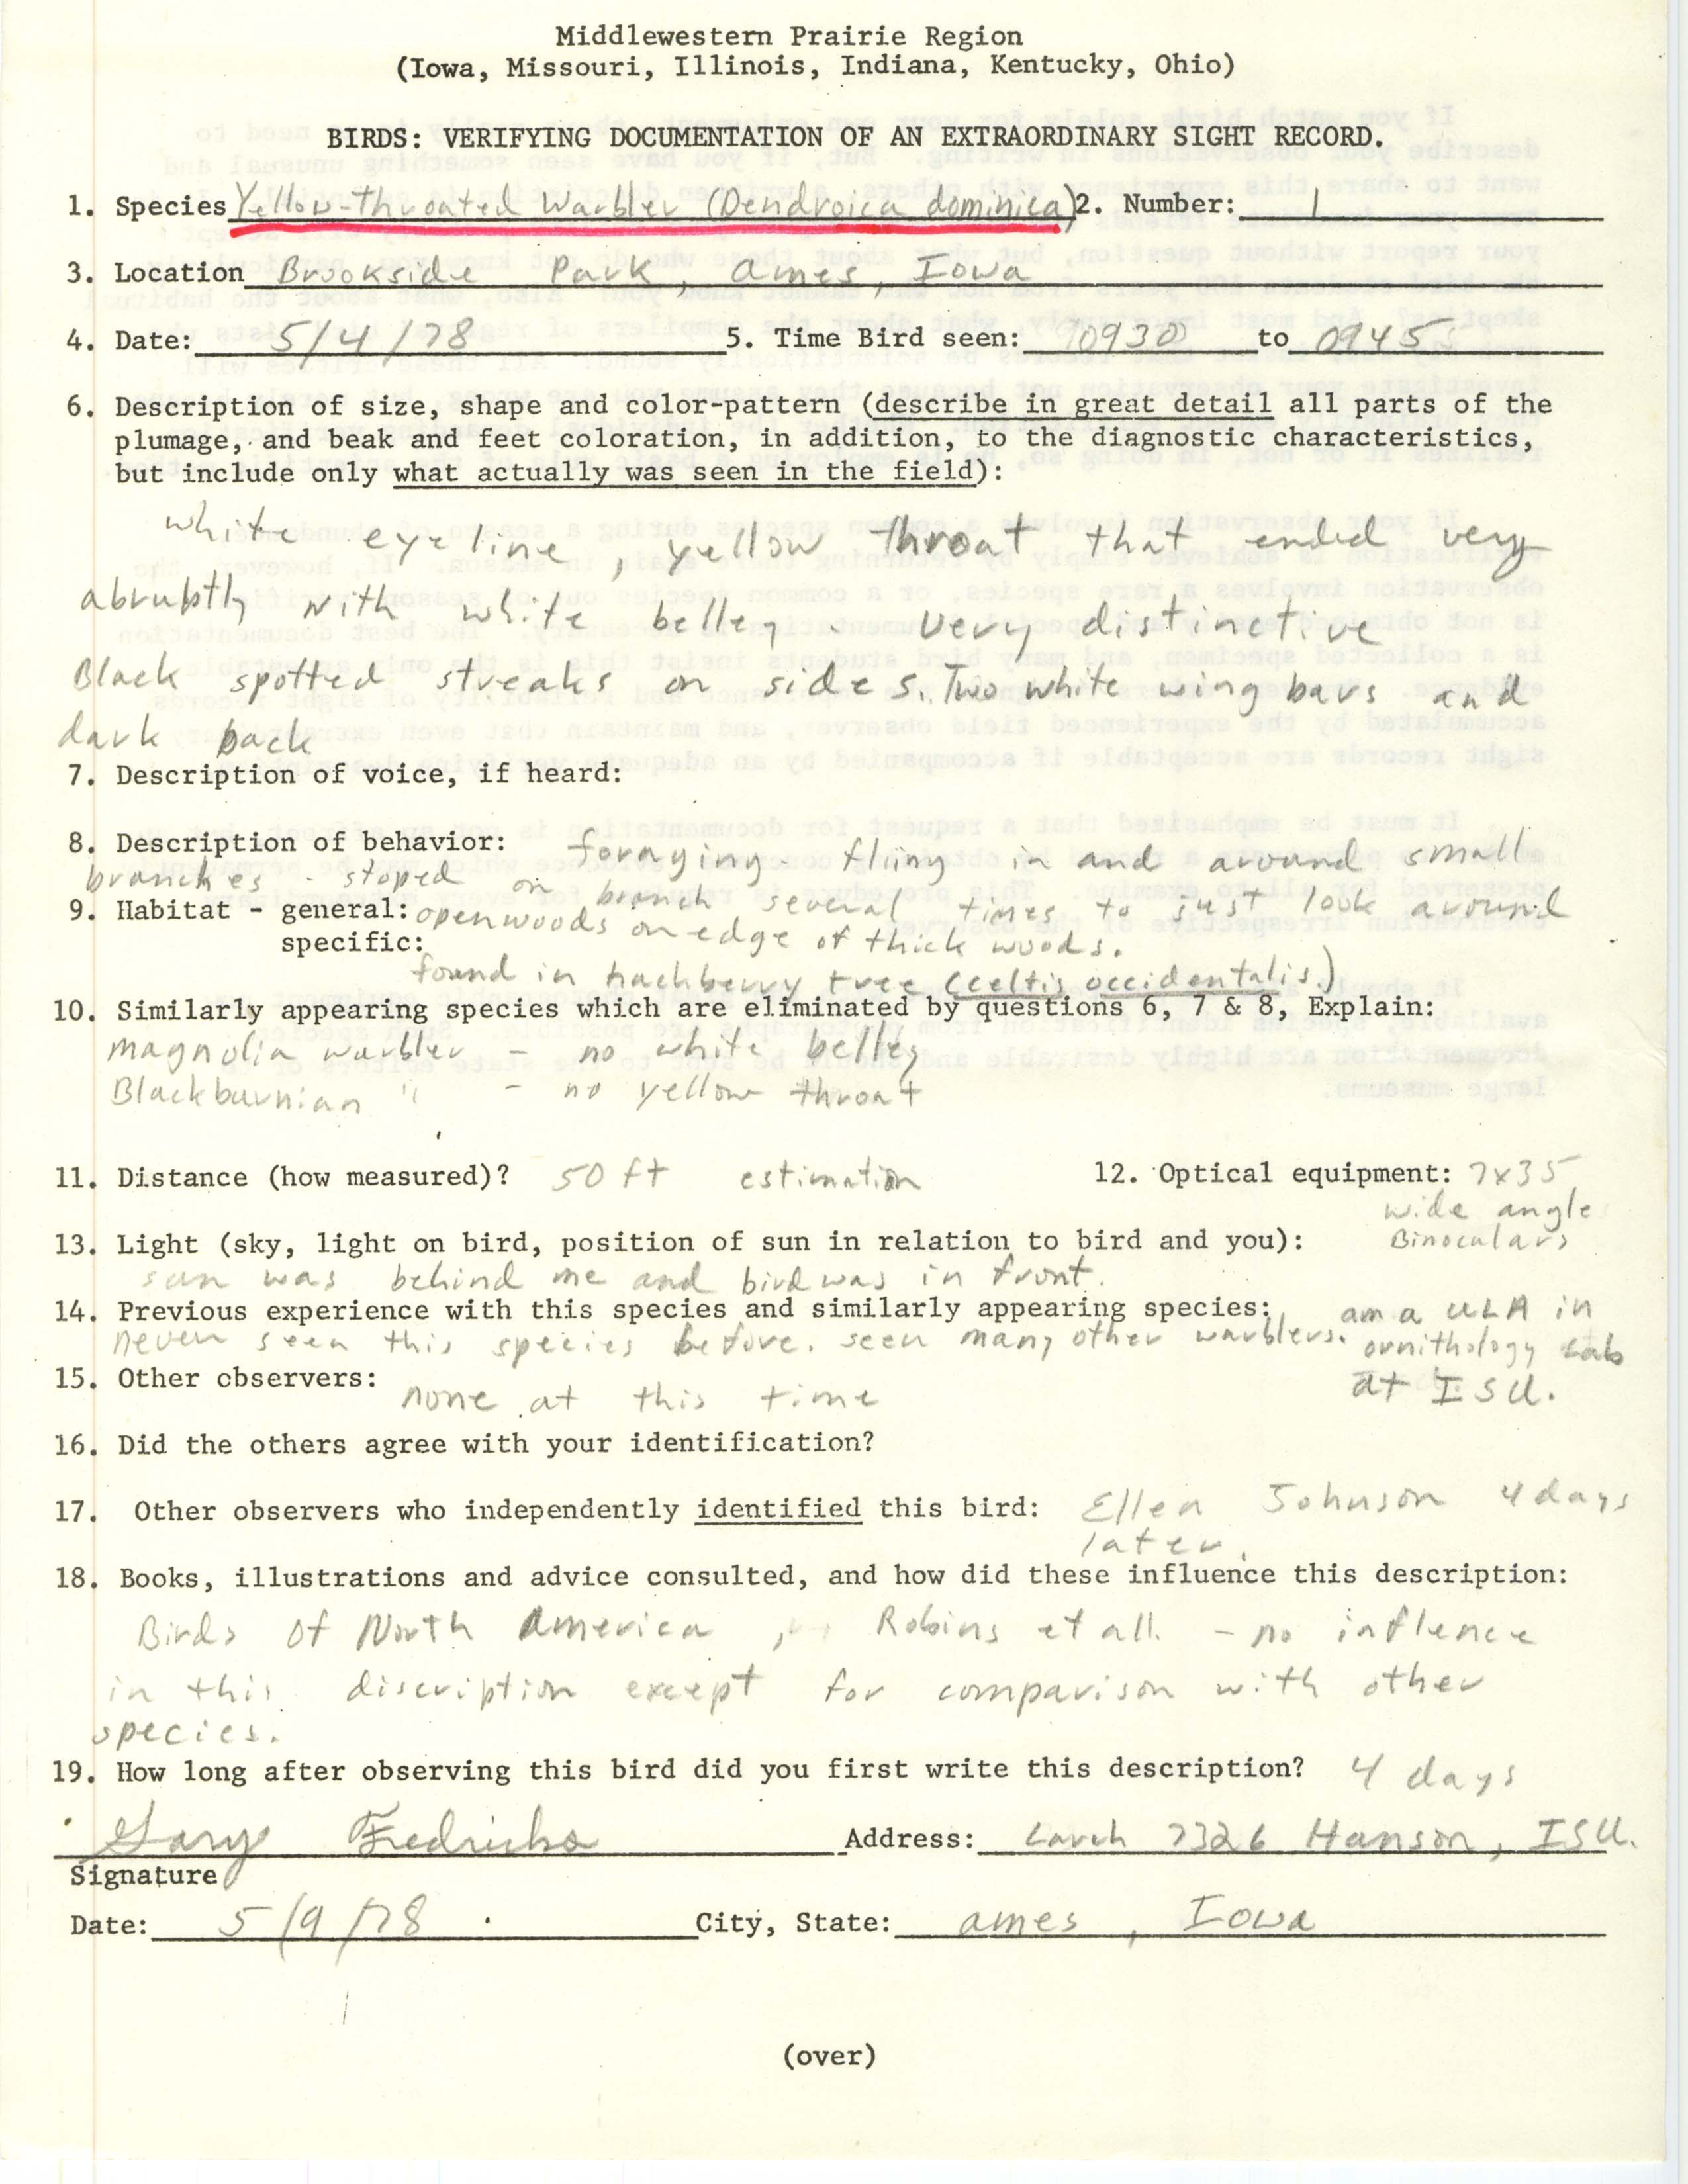 Rare bird documentation form for Yellow-throated Warbler at Brookside Park in Ames, 1978